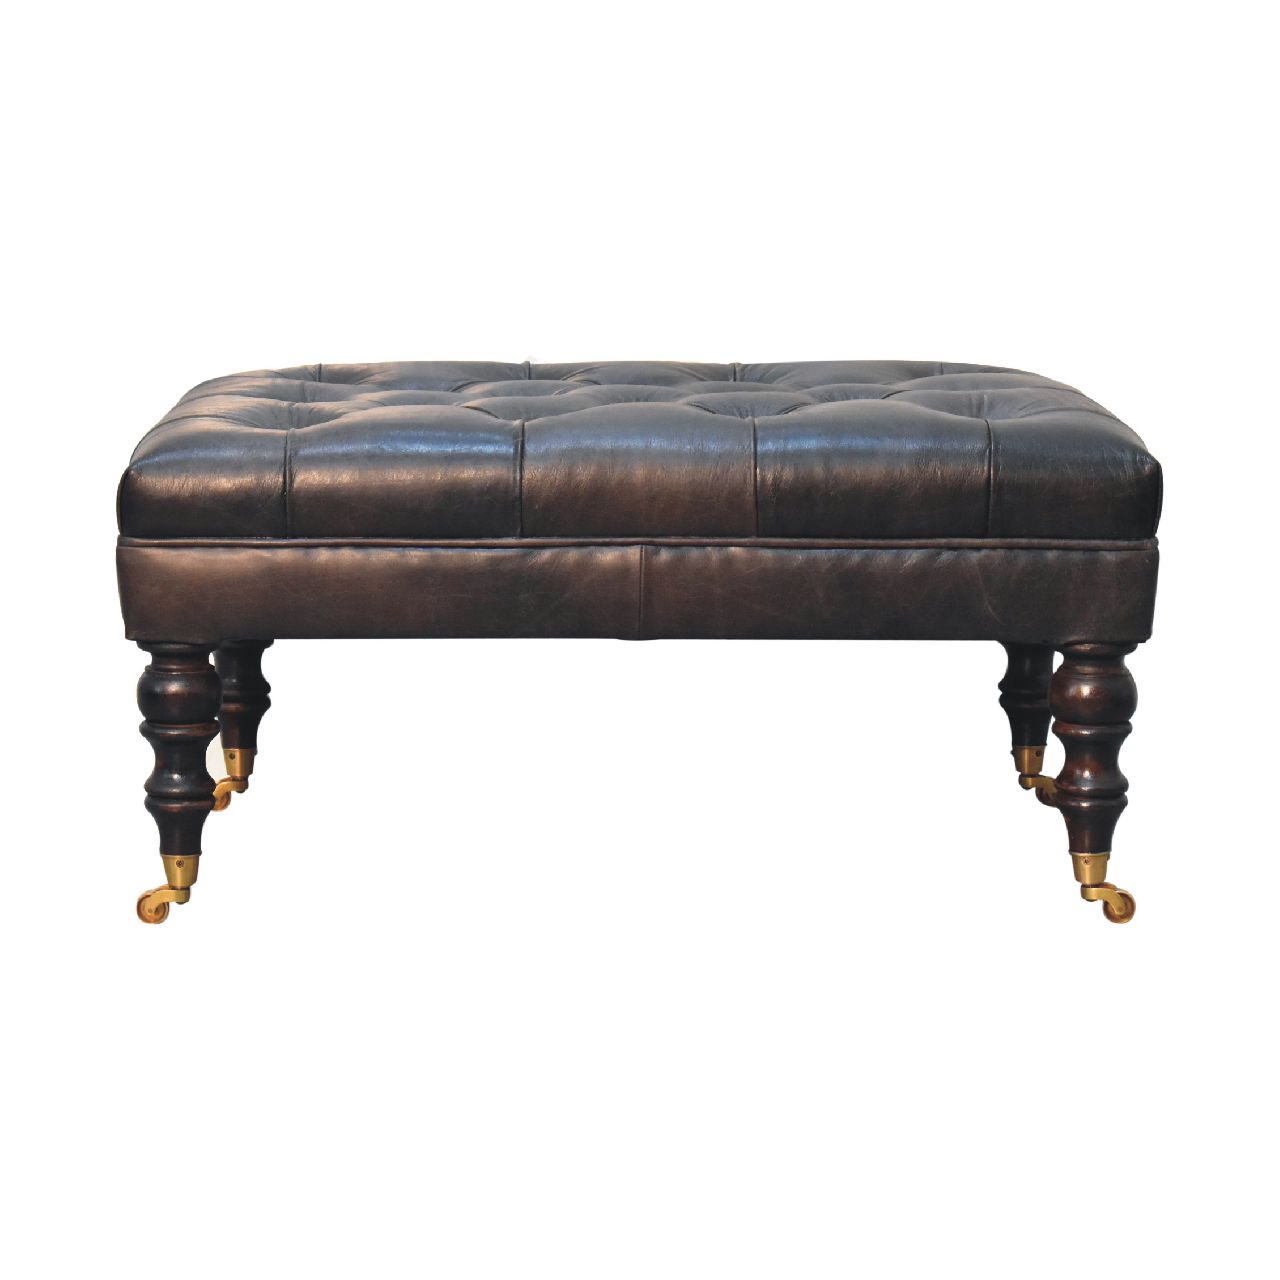 View Buffalo Ash Black Leather Ottoman with Castor Legs information